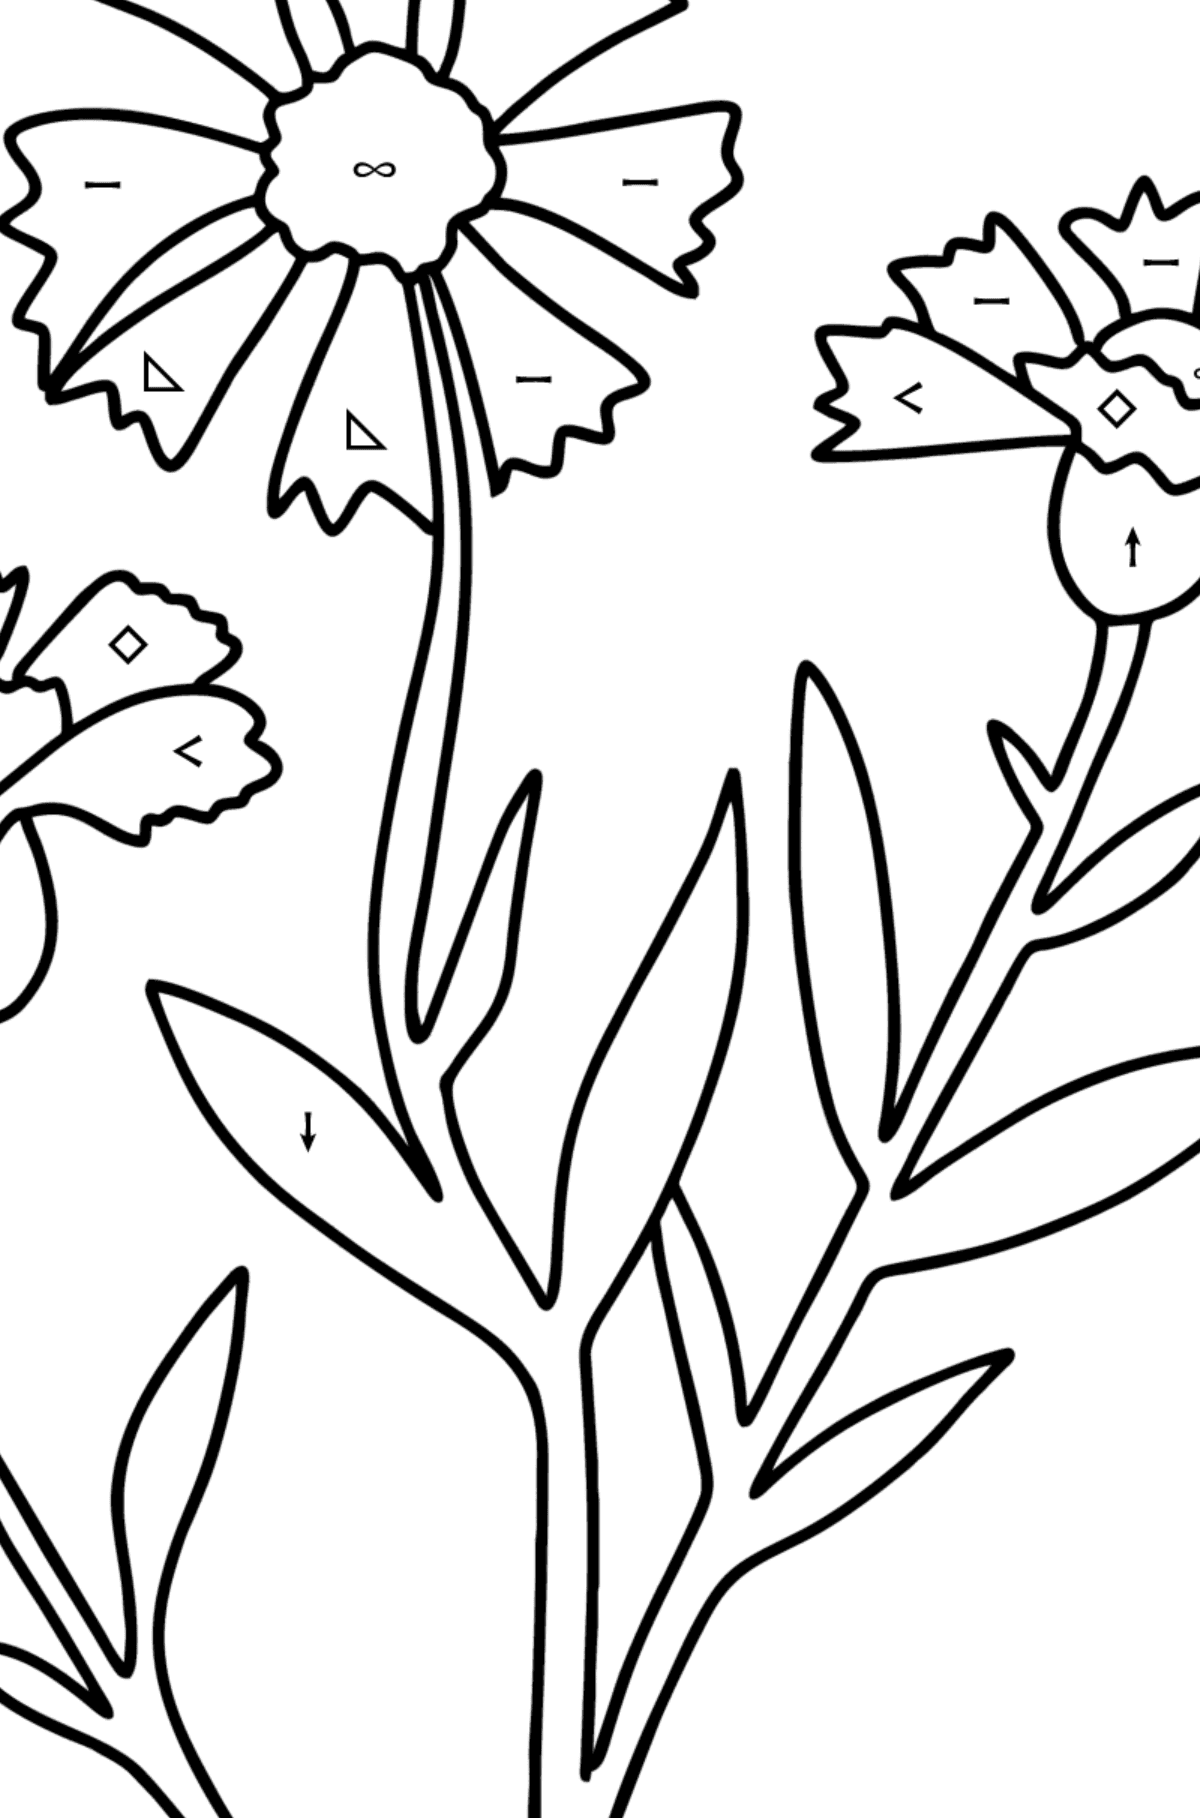 Knapweed coloring page - Coloring by Symbols and Geometric Shapes for Kids